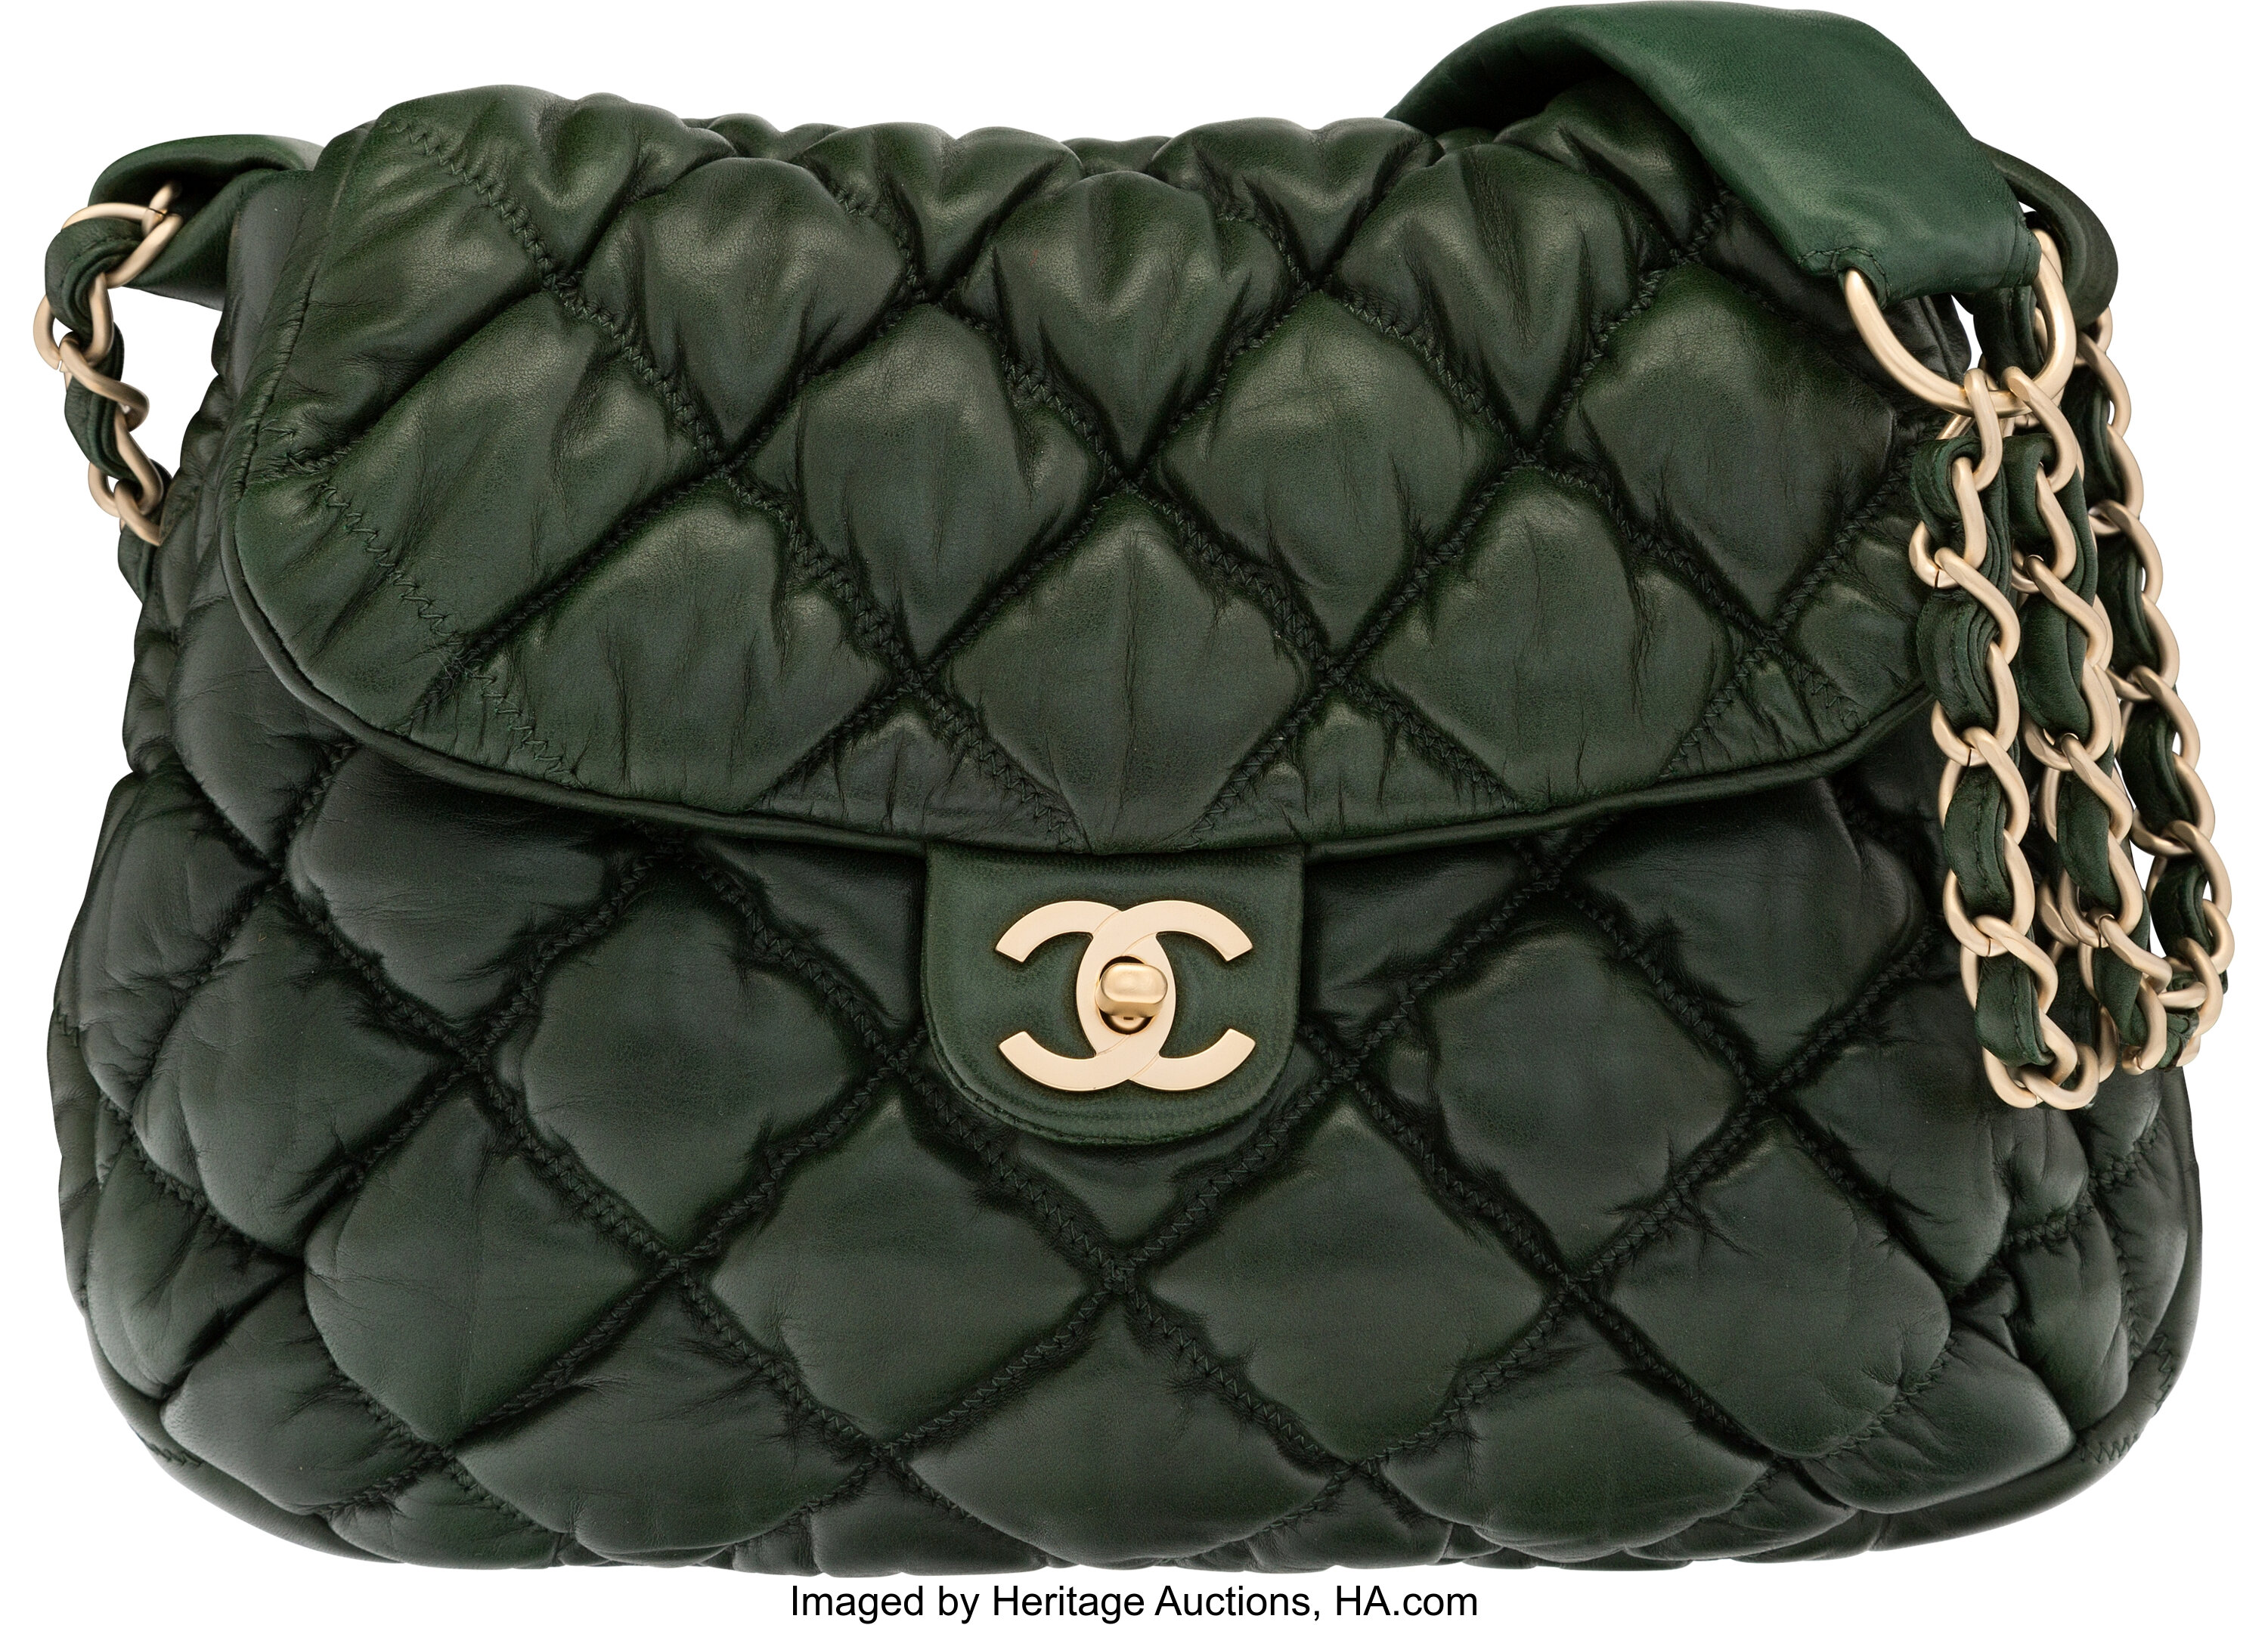 CC Quilted Calfskin Leather Bubble Shoulder Bag (Authentic Pre-Owned)